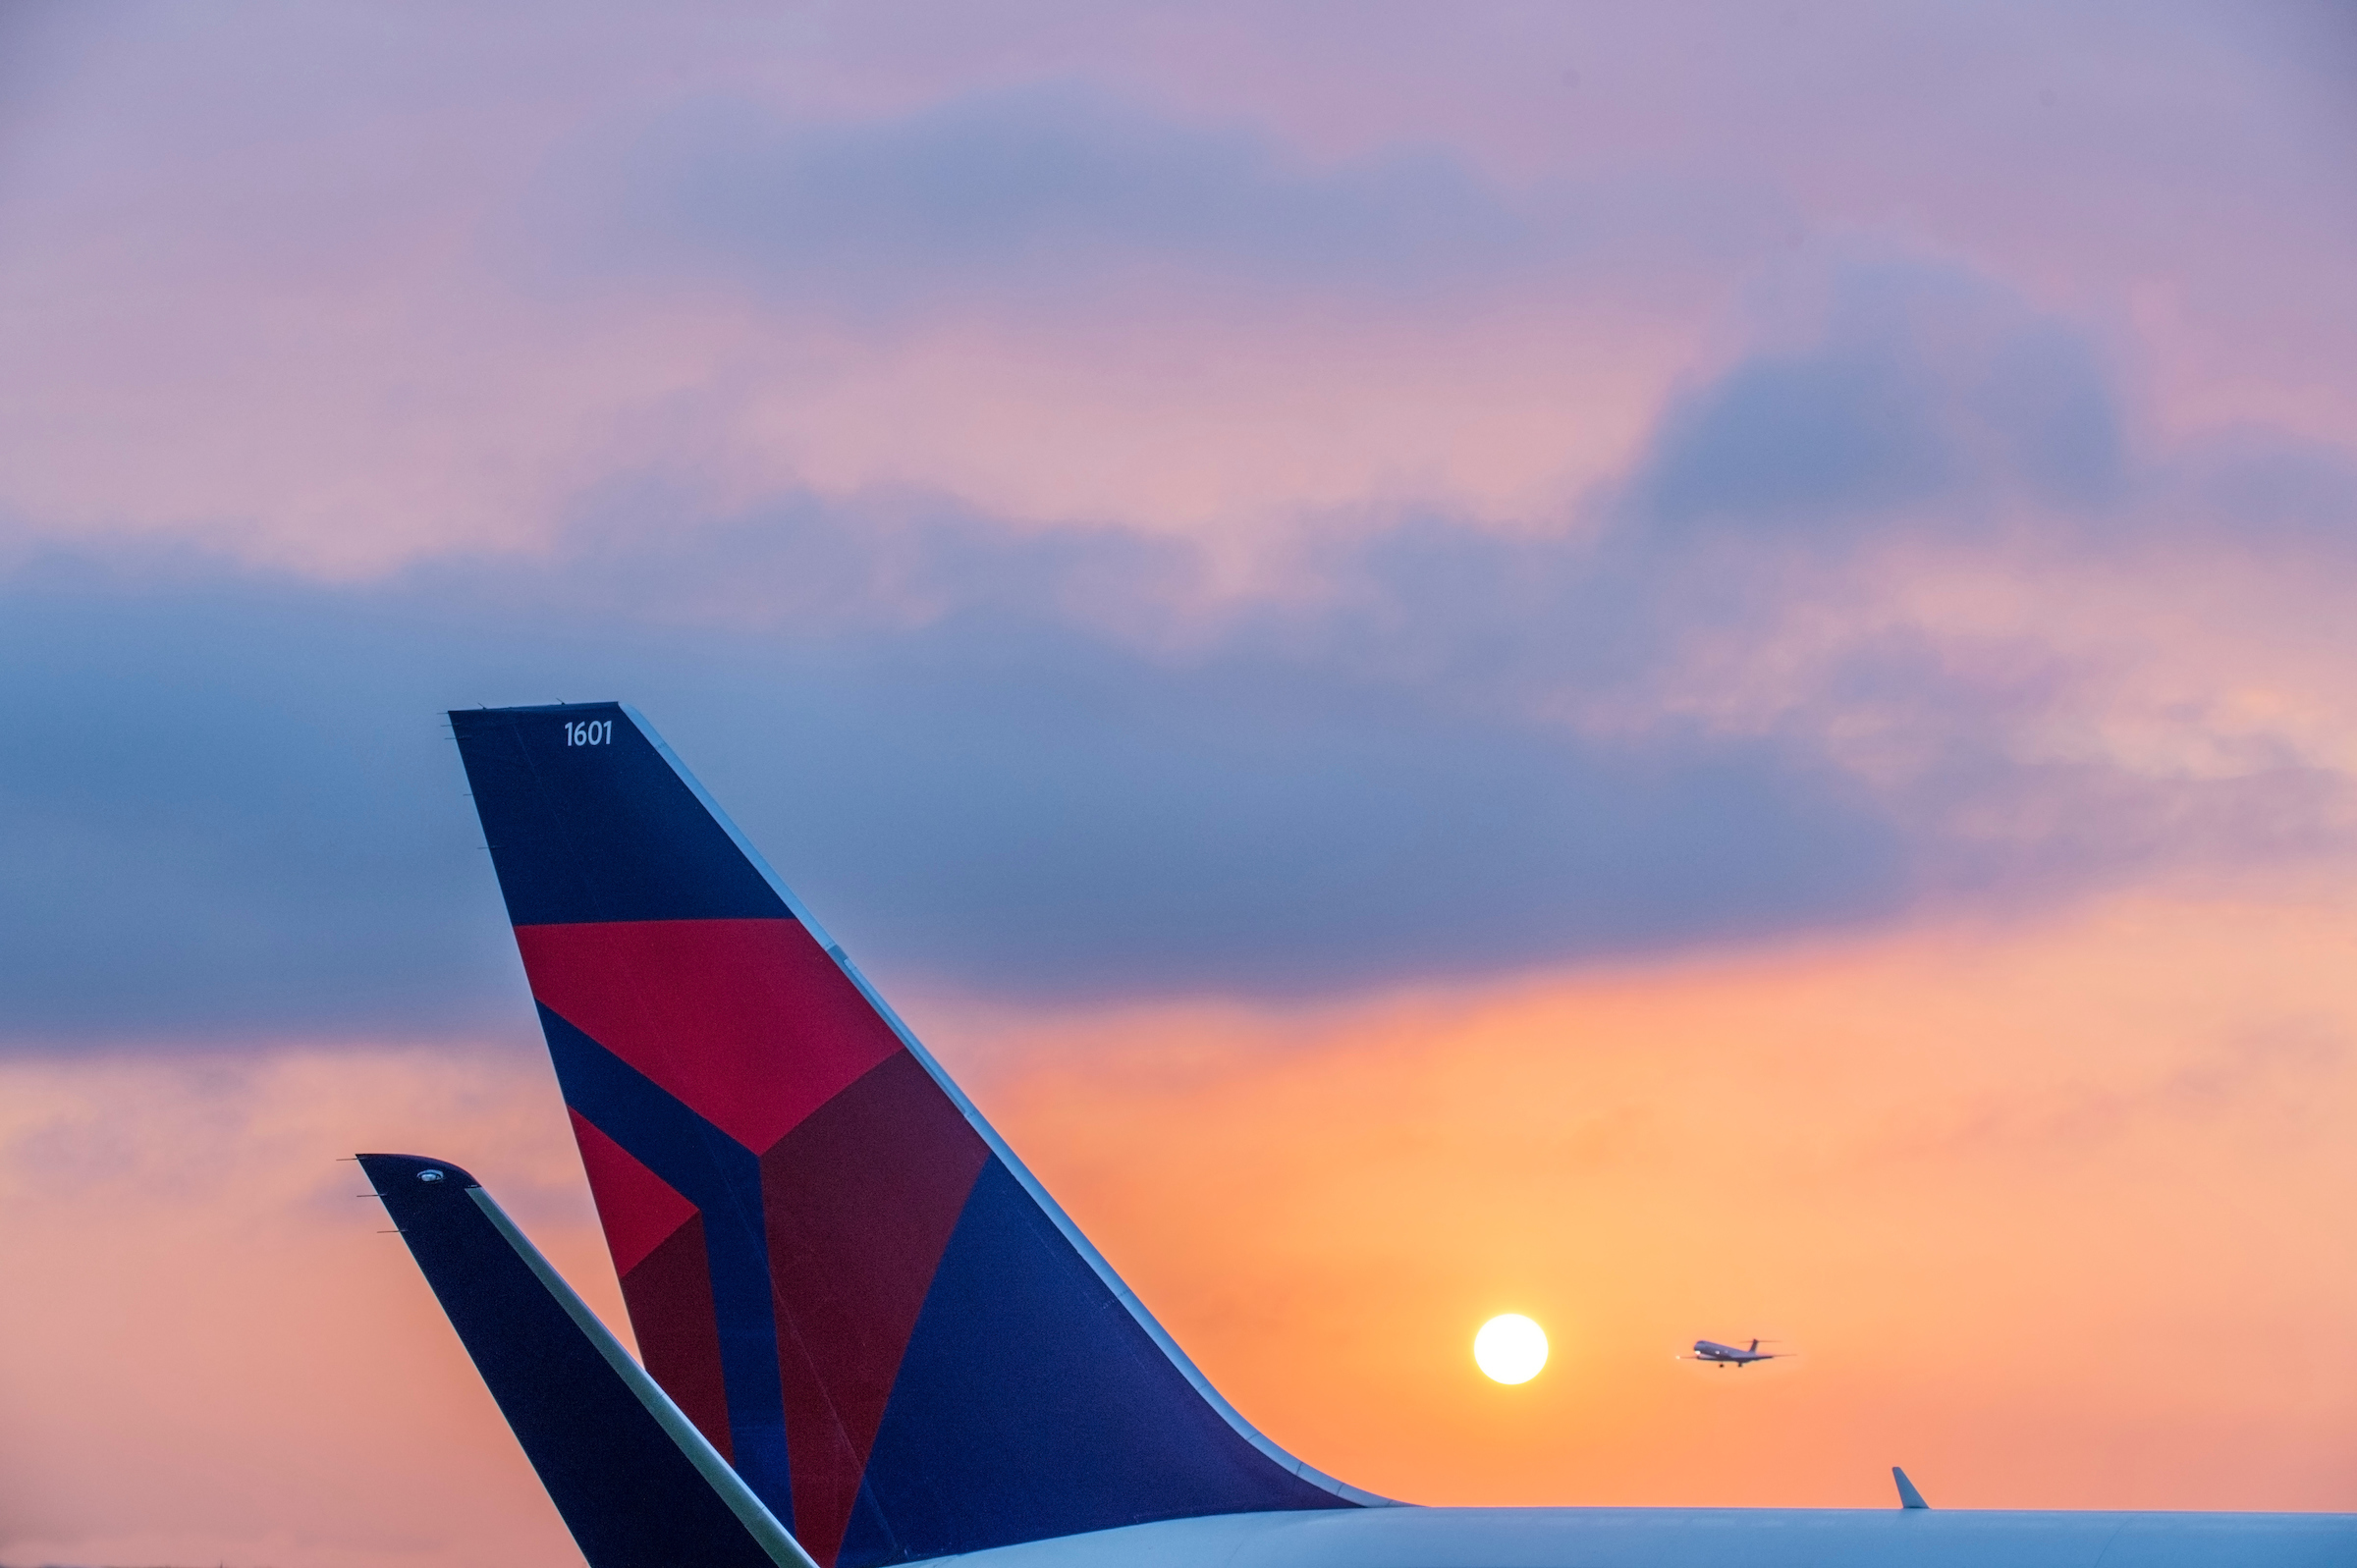 Delta adds Service - Tail of a Boeing 767-300 - Photo provided by Delta Airlines